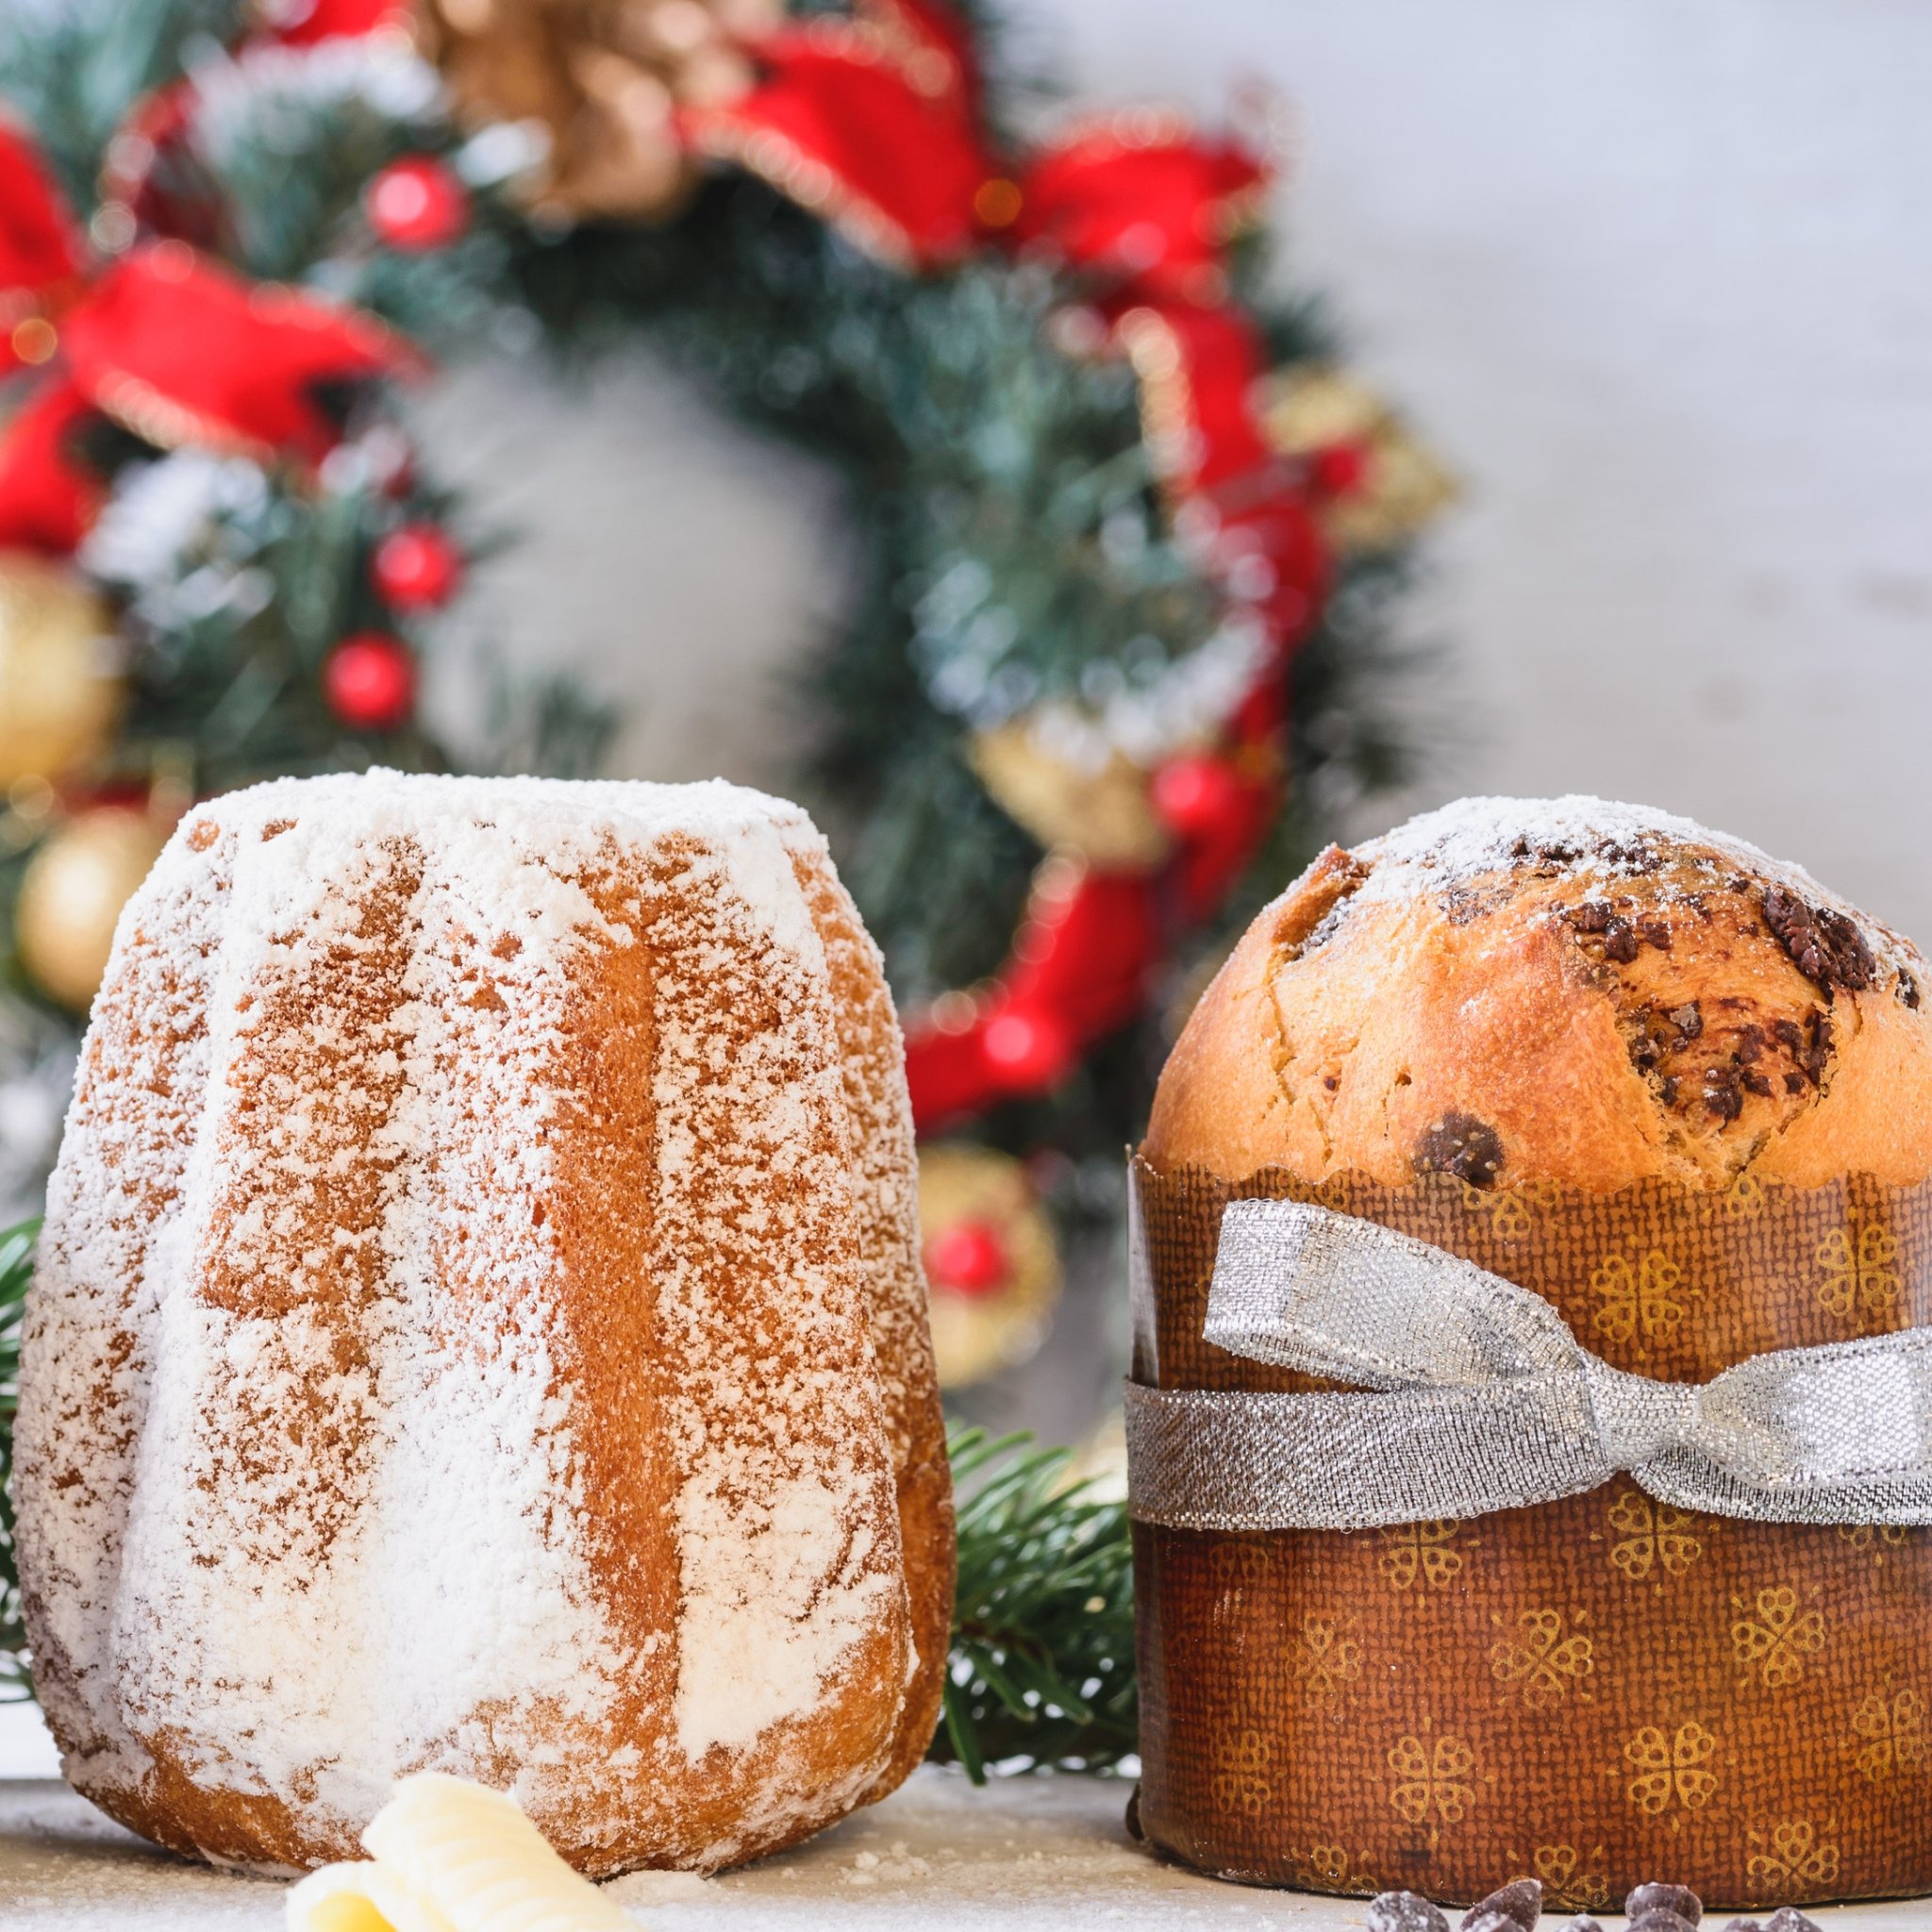 Italian Christmas Desserts Gift Guide: Not only Panettone